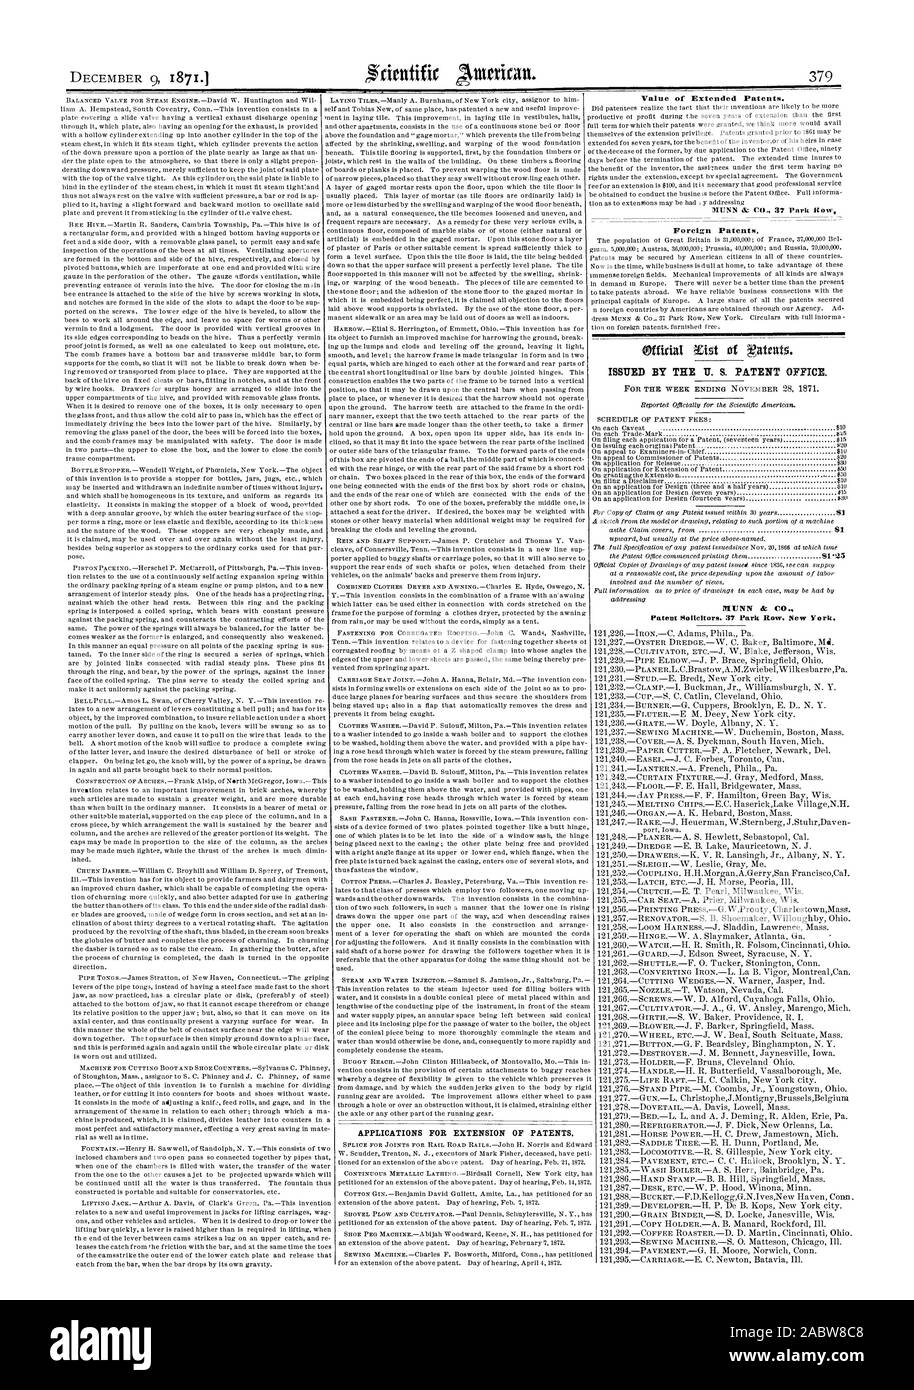 Value of Extended Patents. Foreign Patents. MUNN & C Patent Solicitors. 37 Park Row. New York. APPLICATIONS FOR EXTENSION OF PATENTS., scientific american, 1871-12-09 Stock Photo